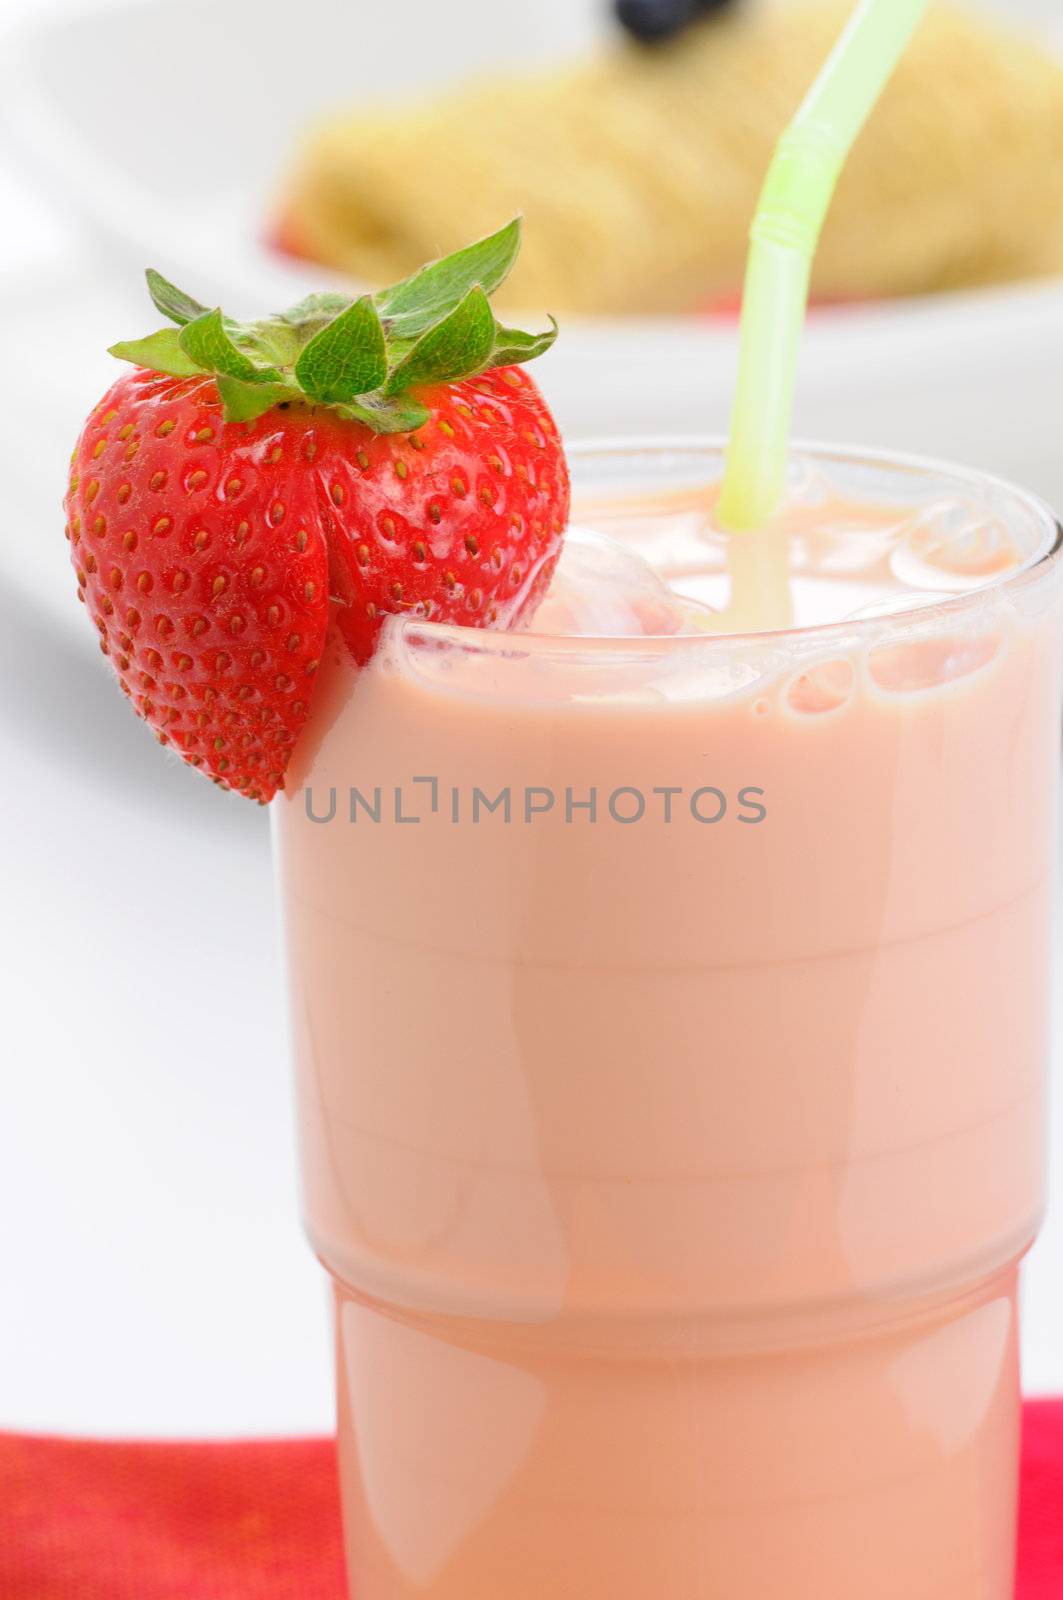 Delicious and healthy strawberry breakfast drink.